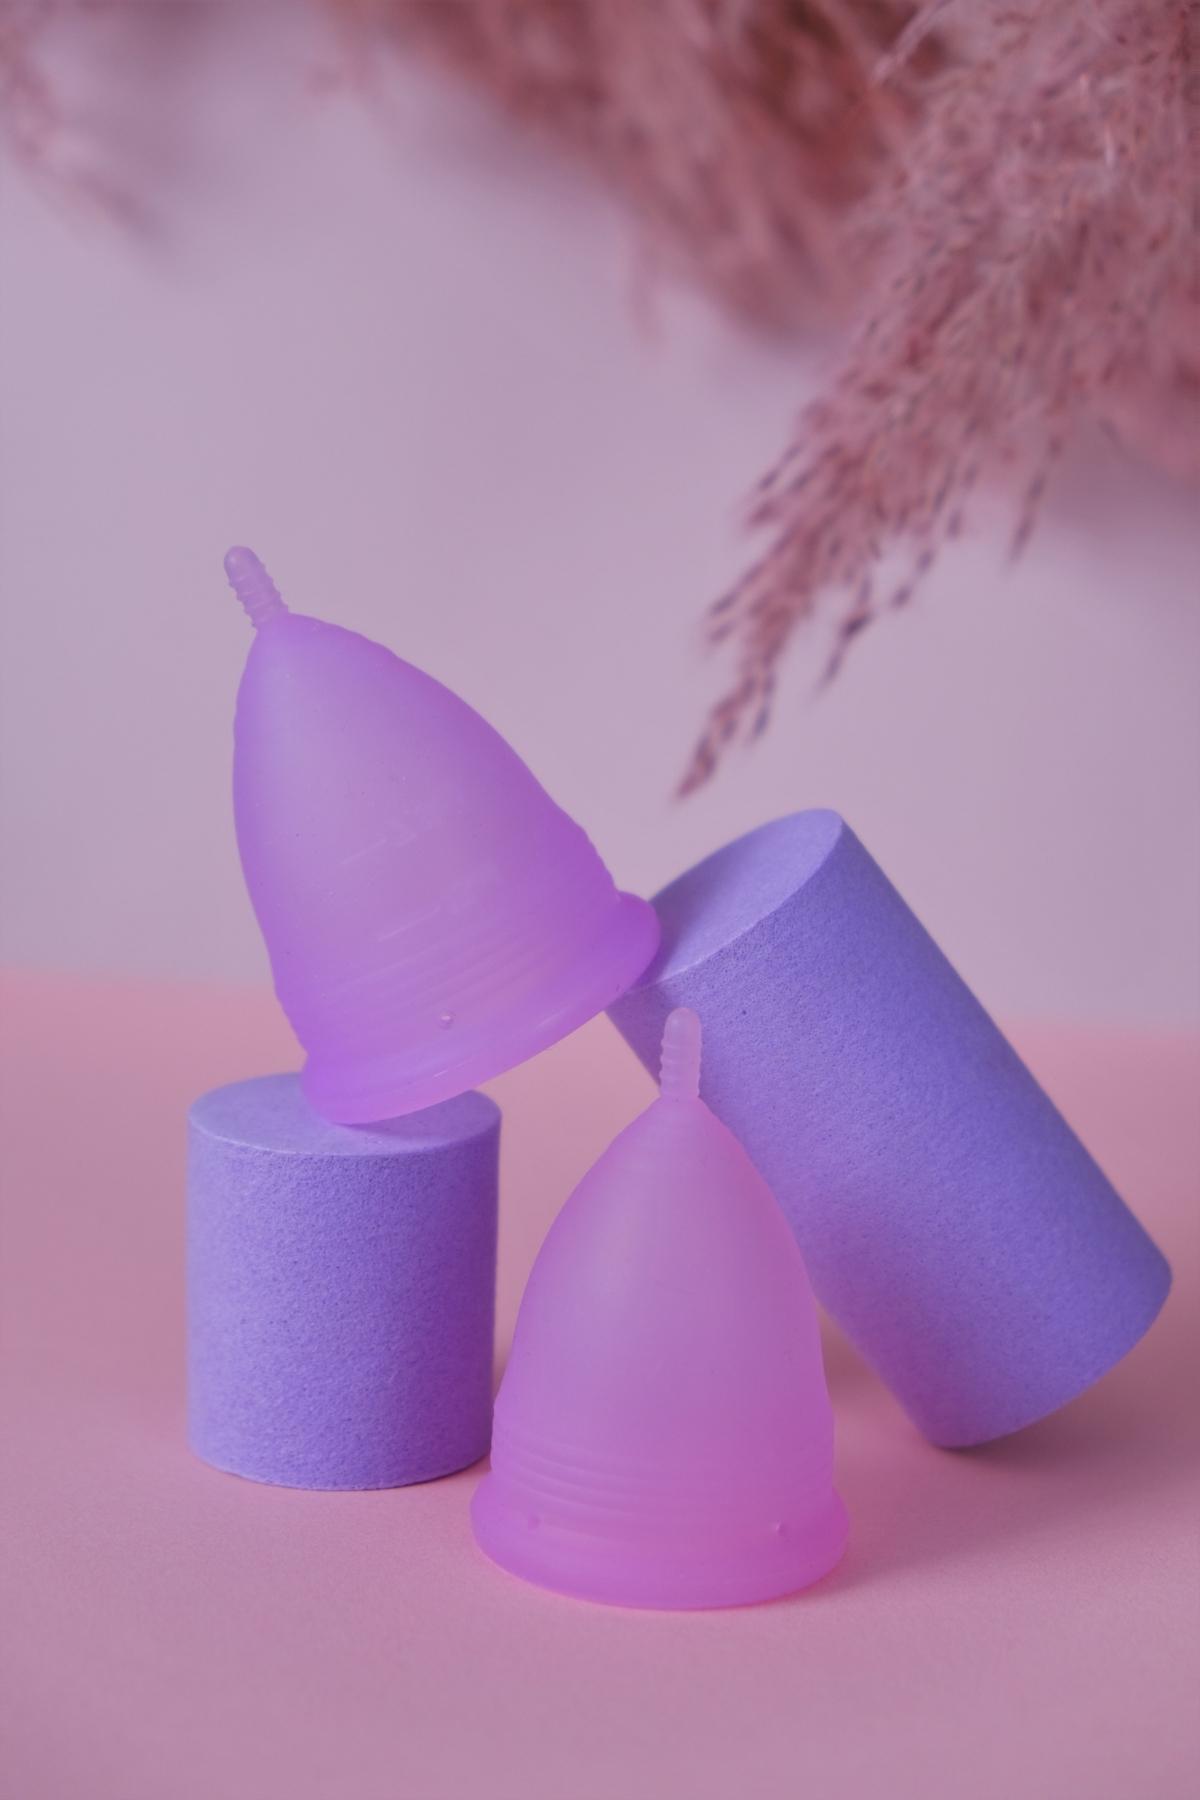 Two purple menstrual cups balancing on each other